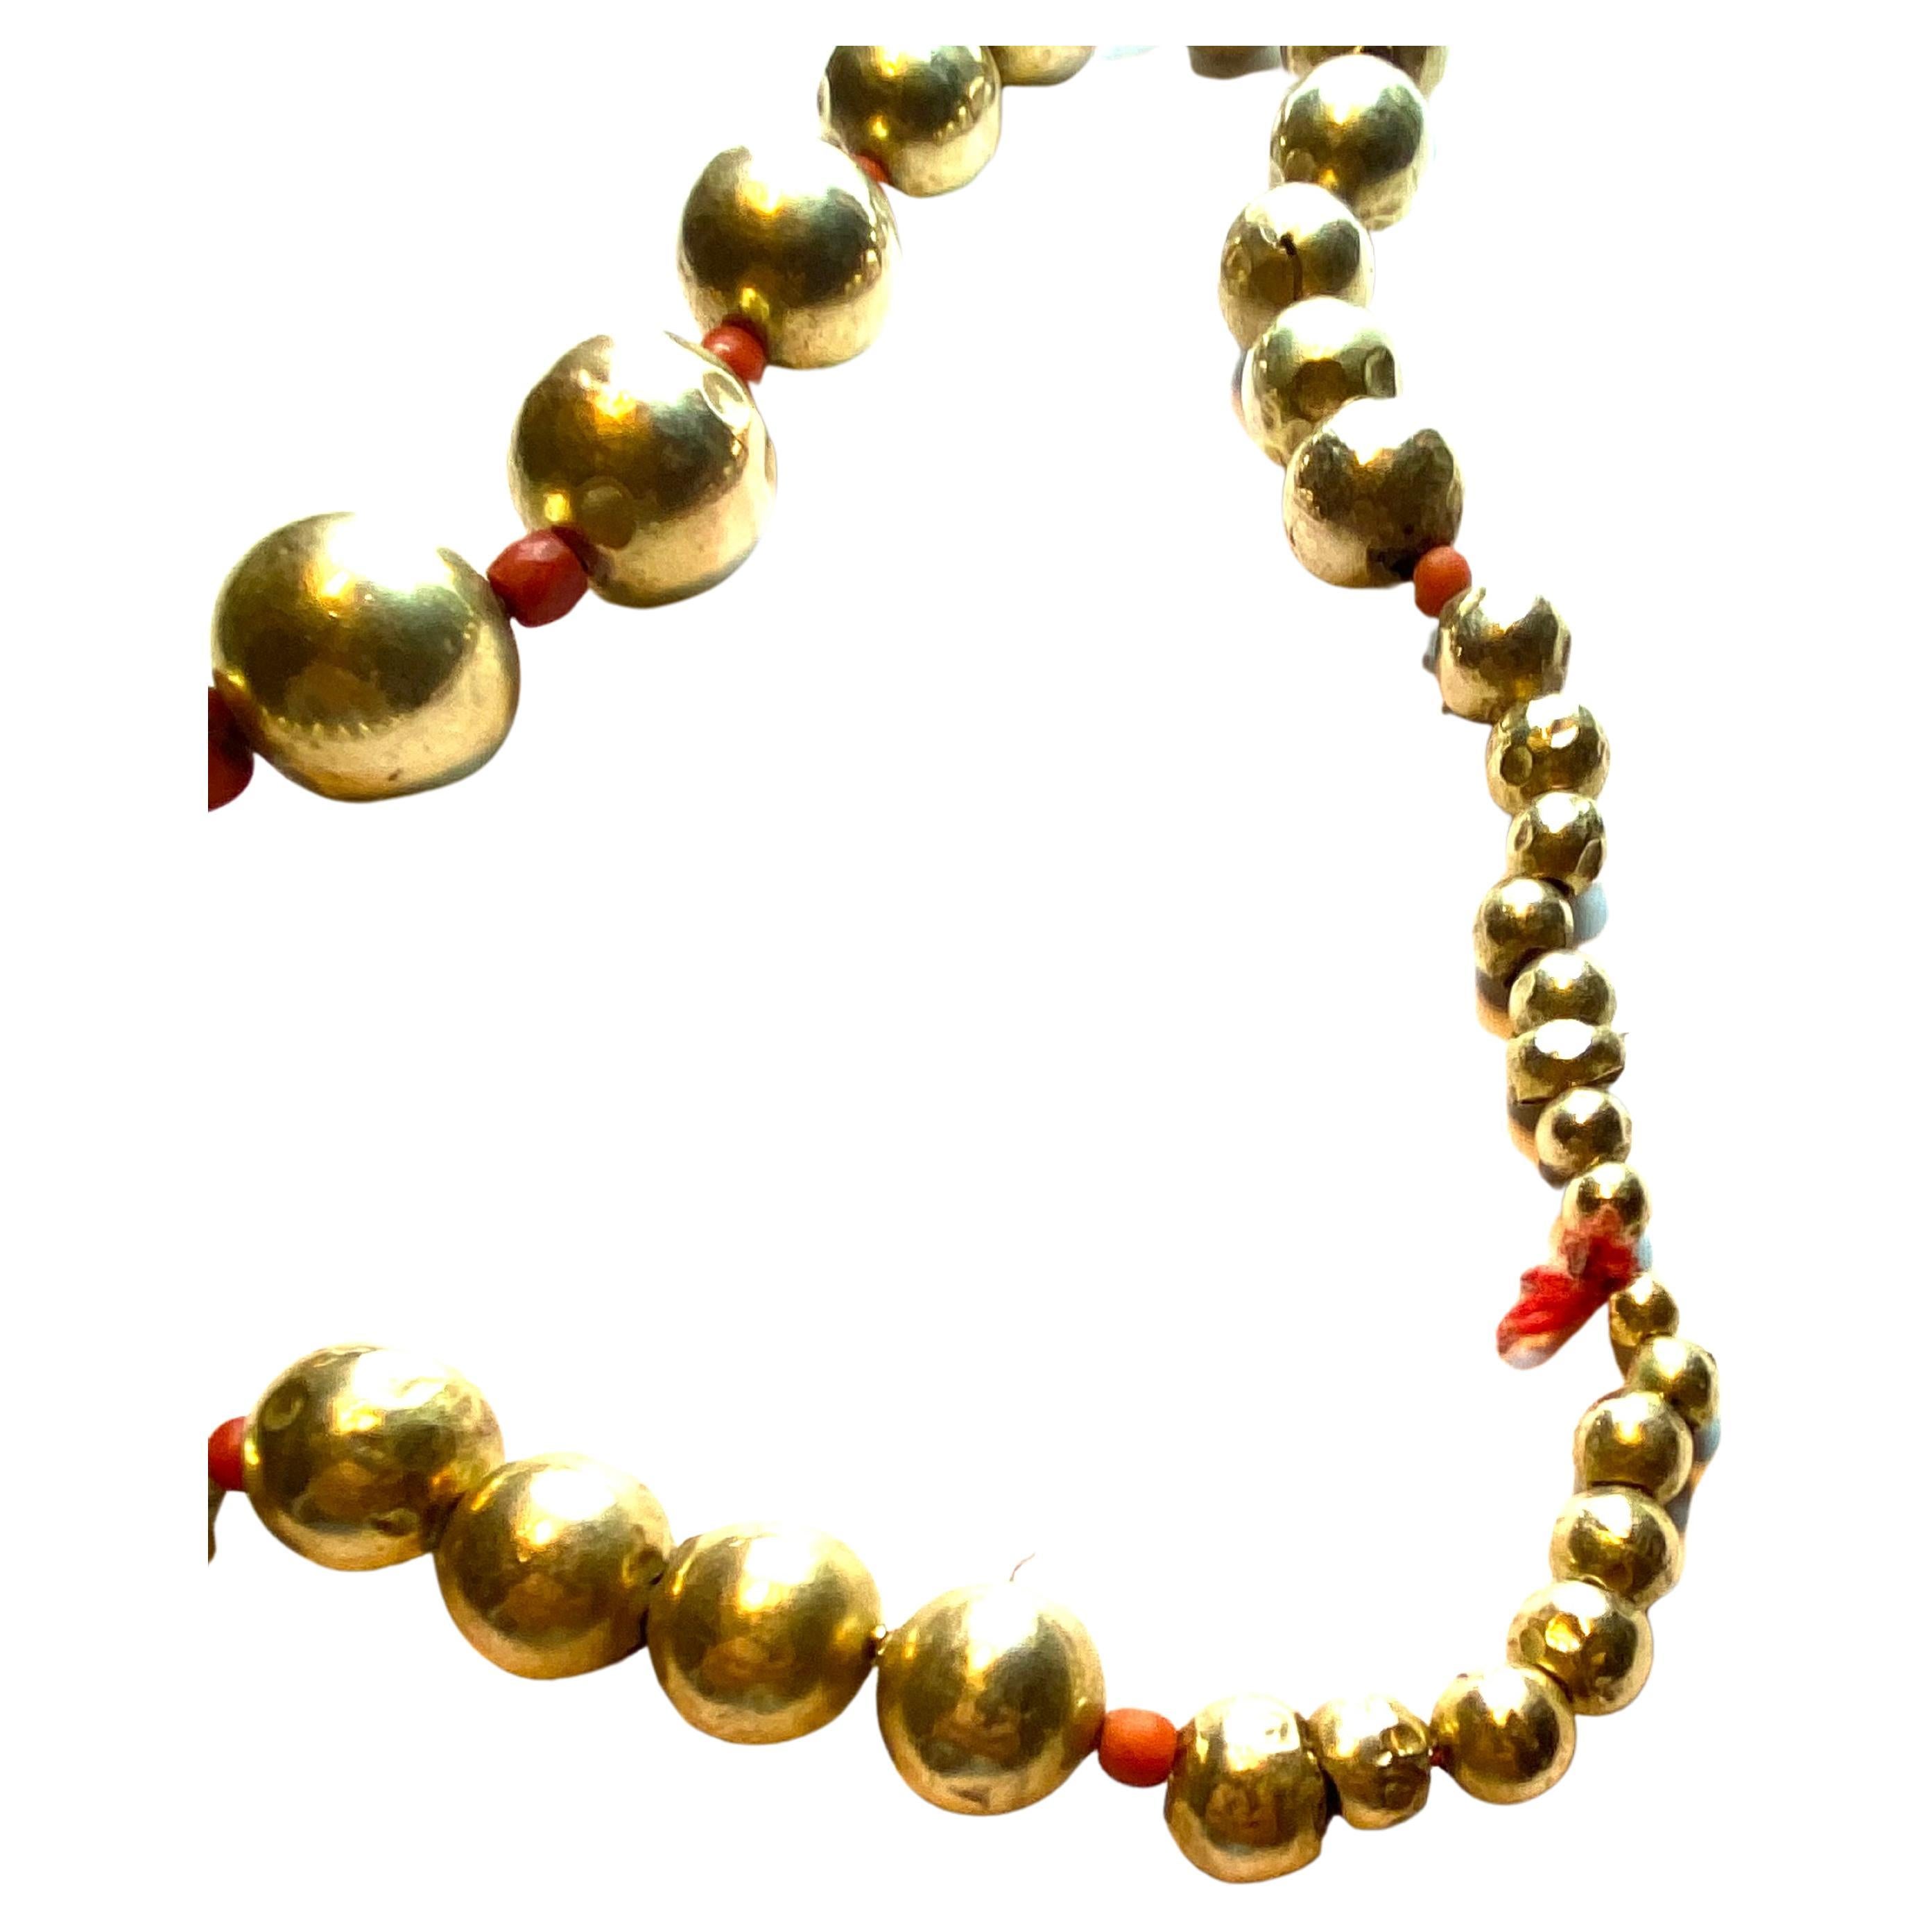 Very rare necklace with gold spheres, called 